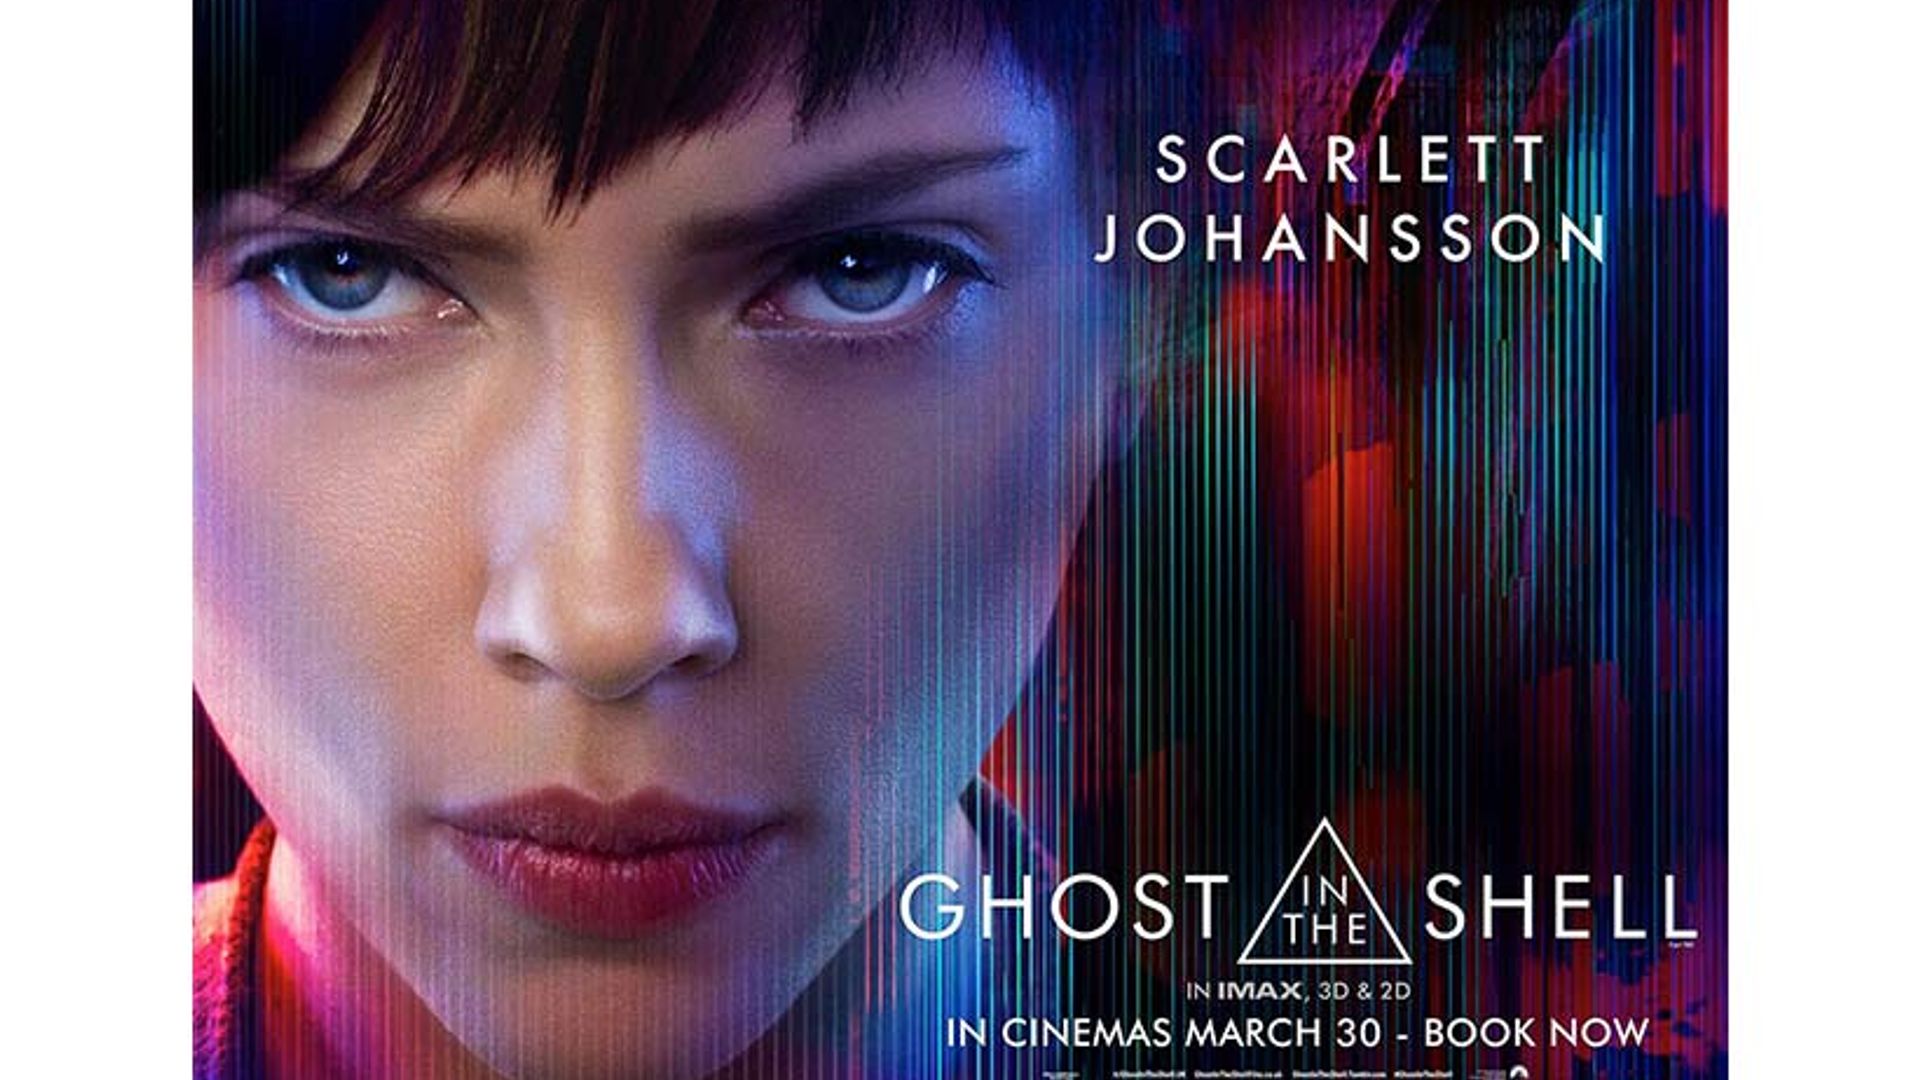 Win with GHOST IN THE SHELL! Enter to win 2 tickets to an exclusive preview screening!